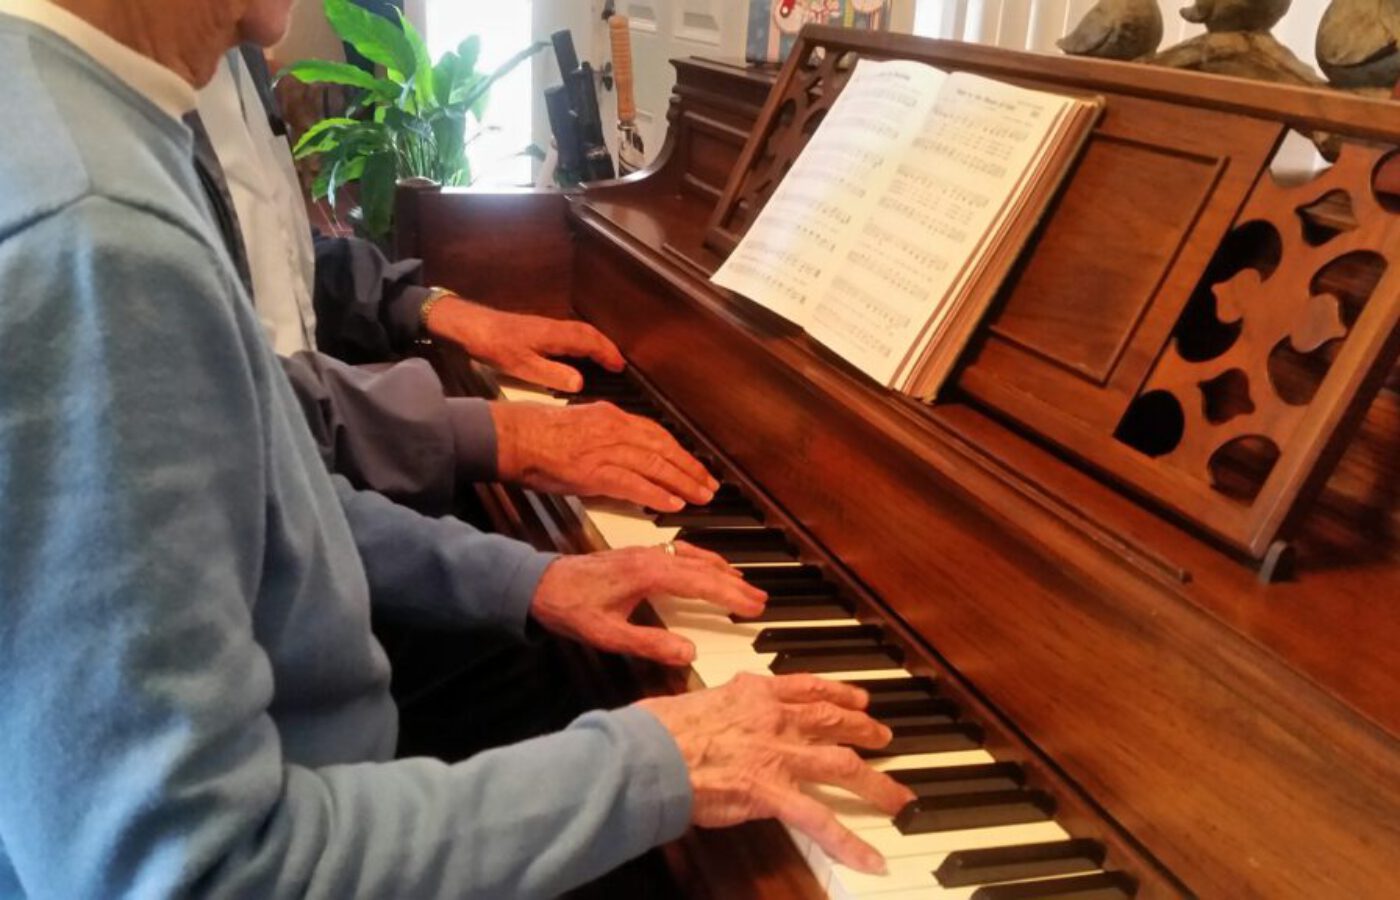 hands-on-piano-playing-music-together-as-seniors-v-ASHZ3LS